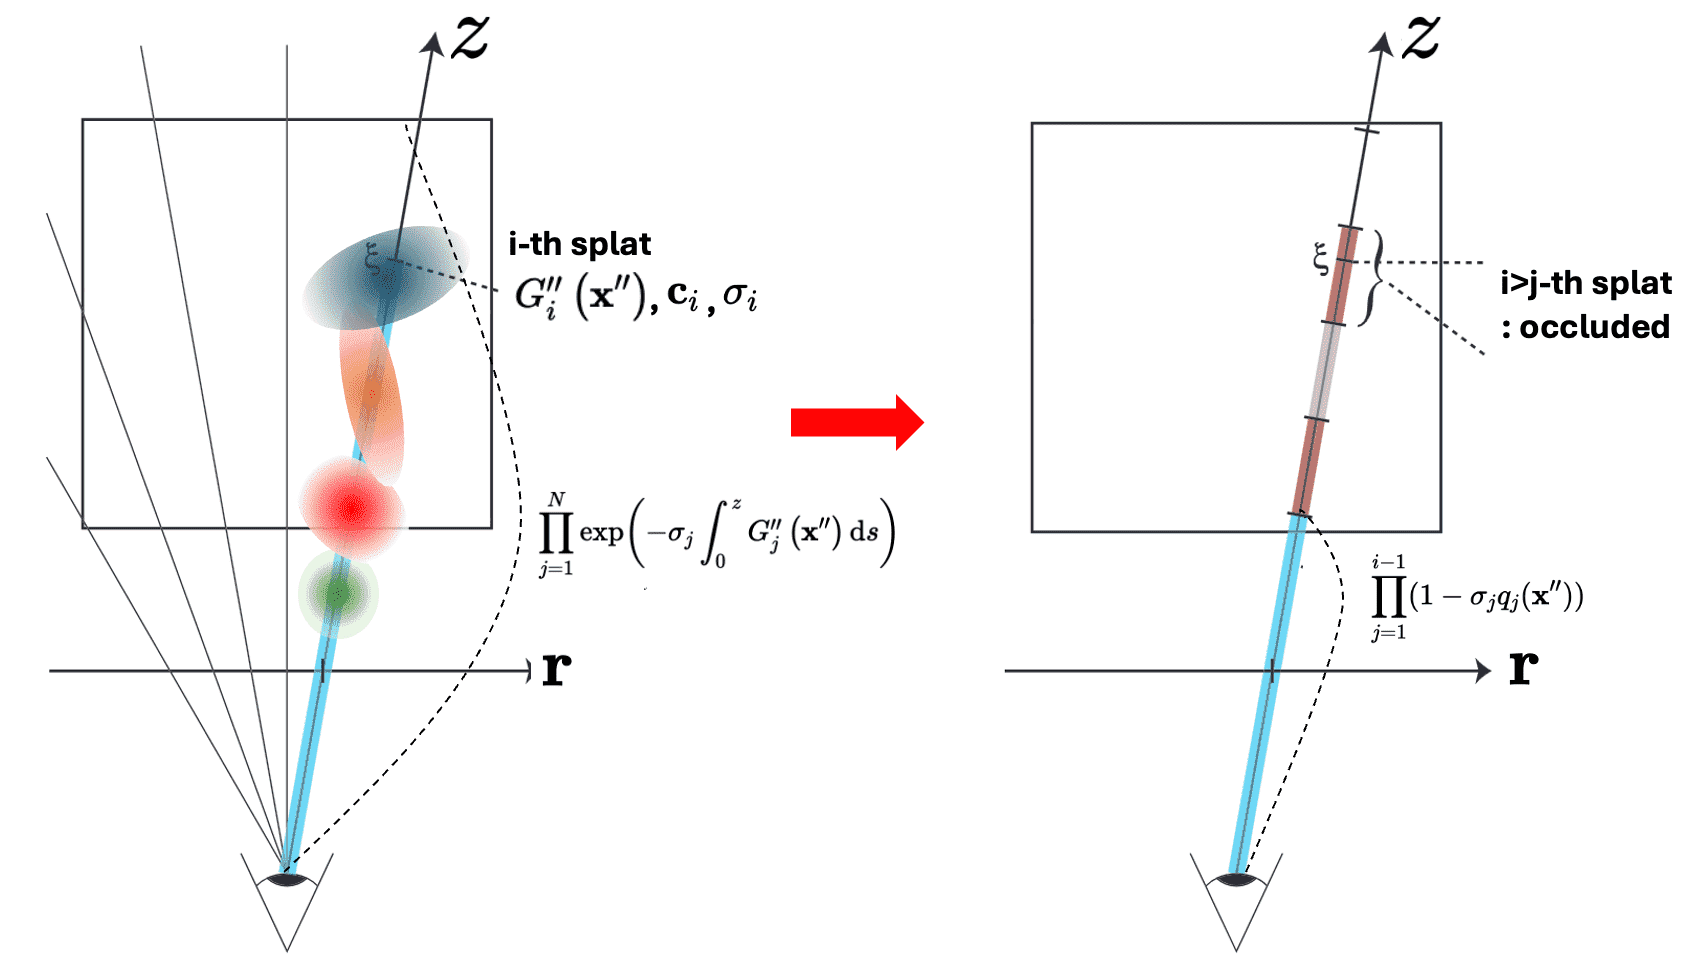 Approximations of self-occlusion in volume splatting algorithms